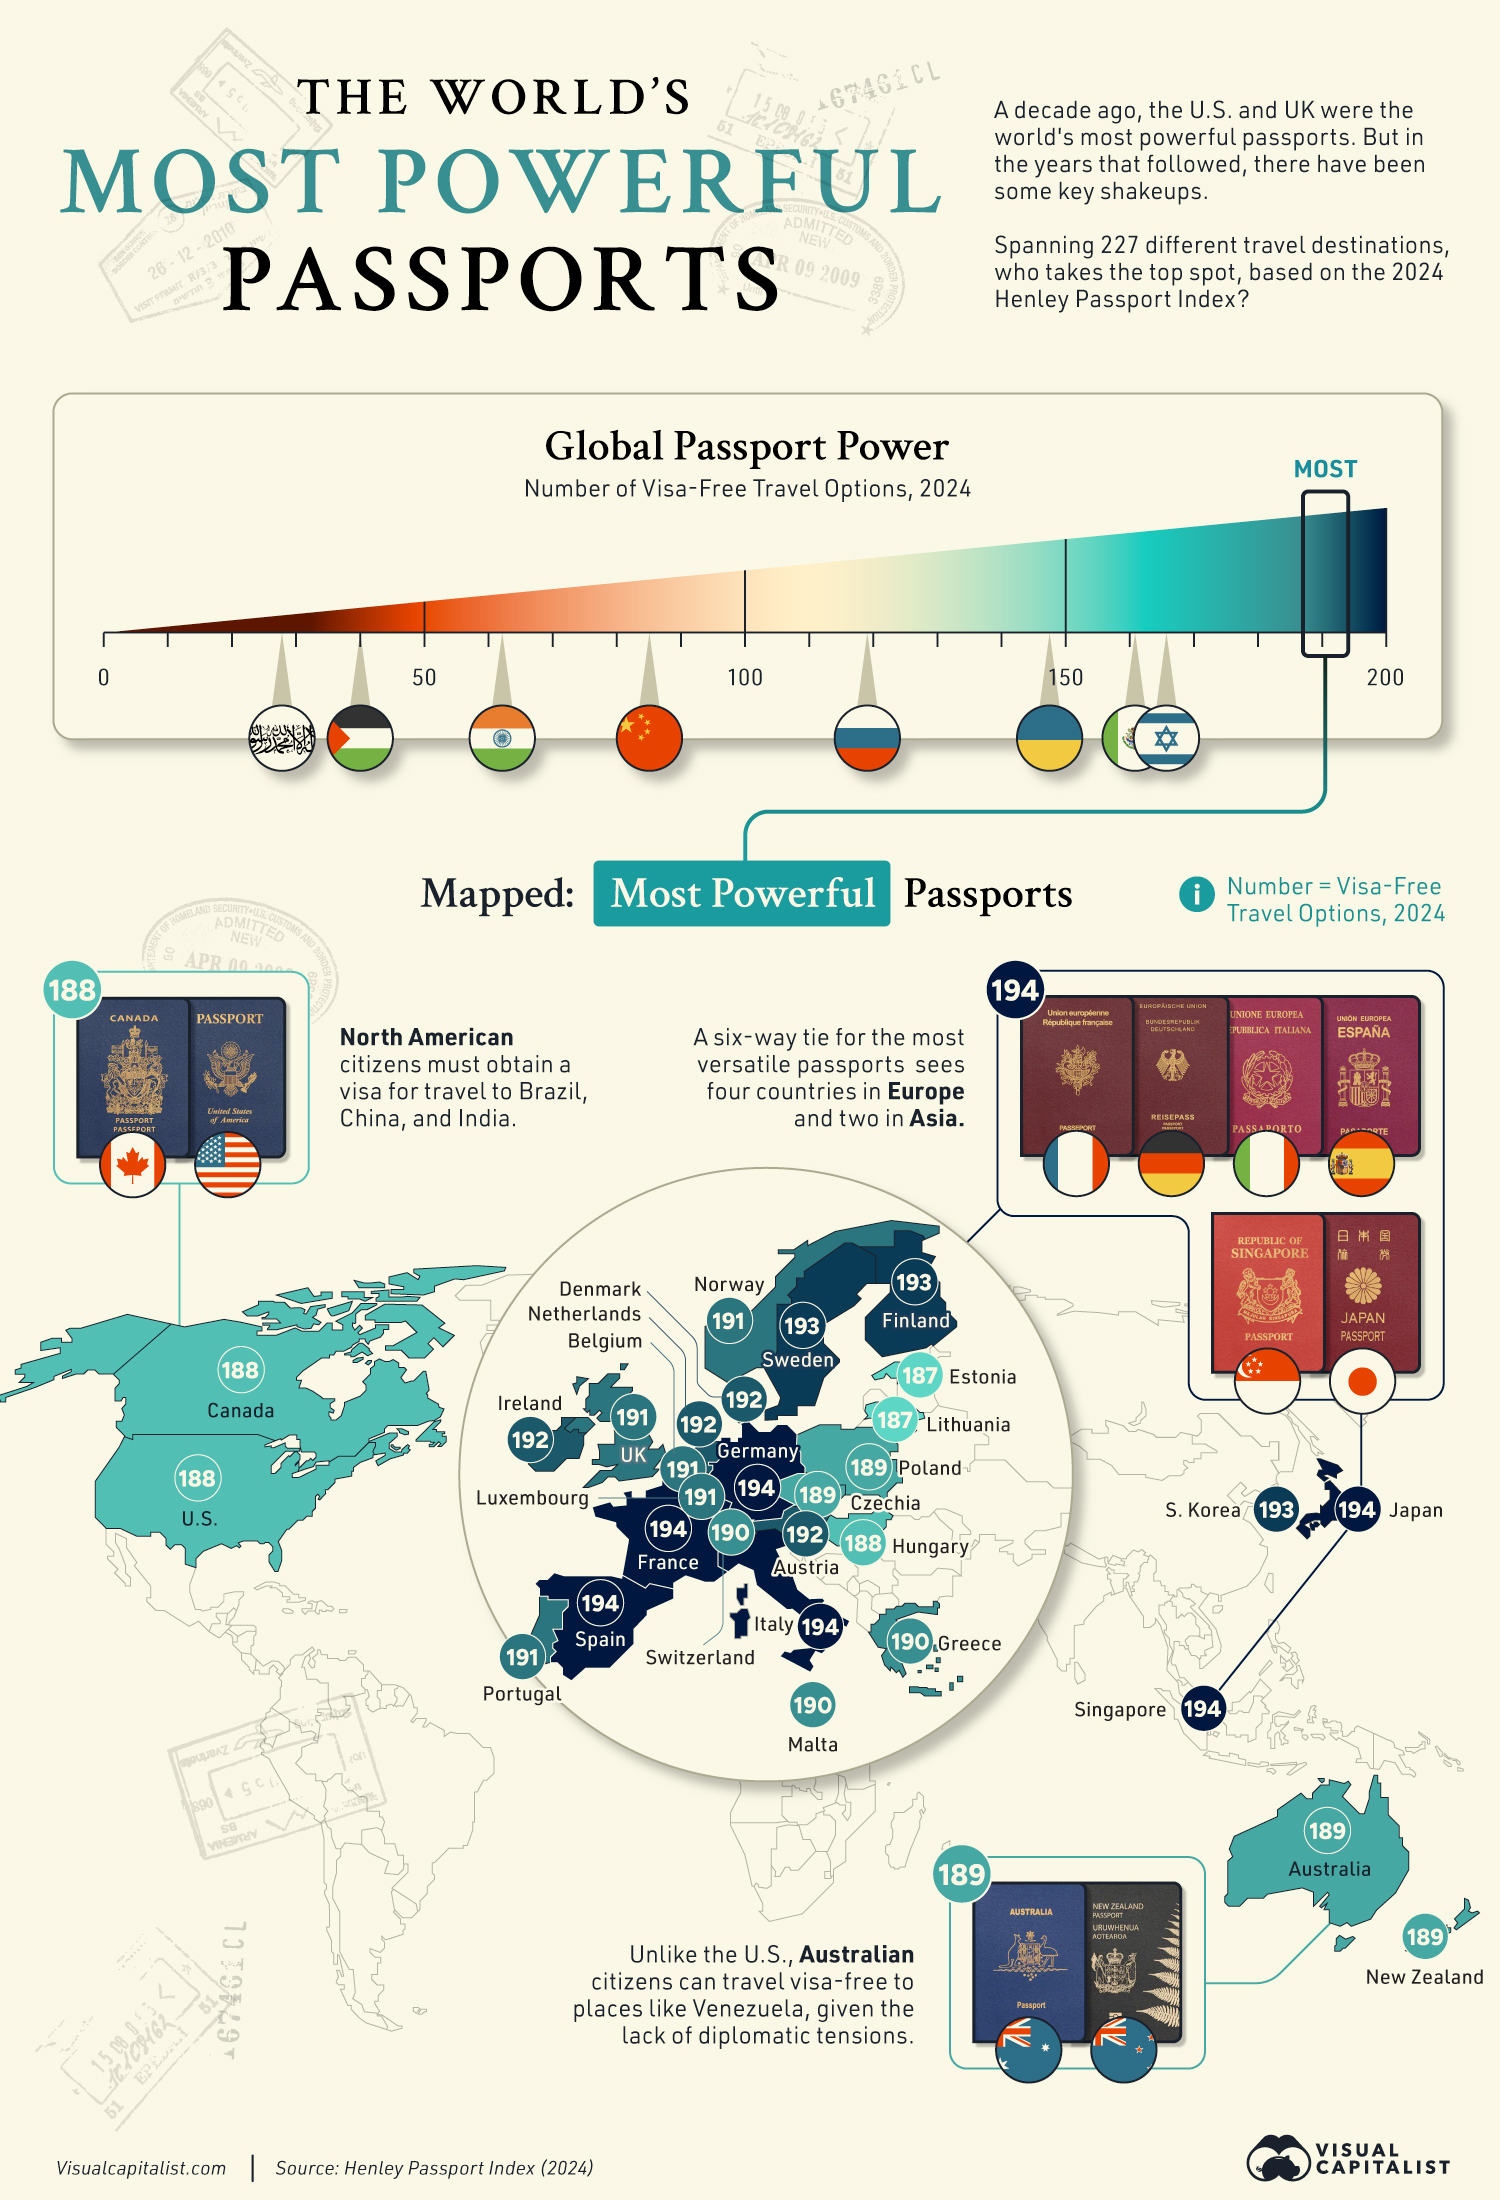 This map shows the most powerful passports in 2024.